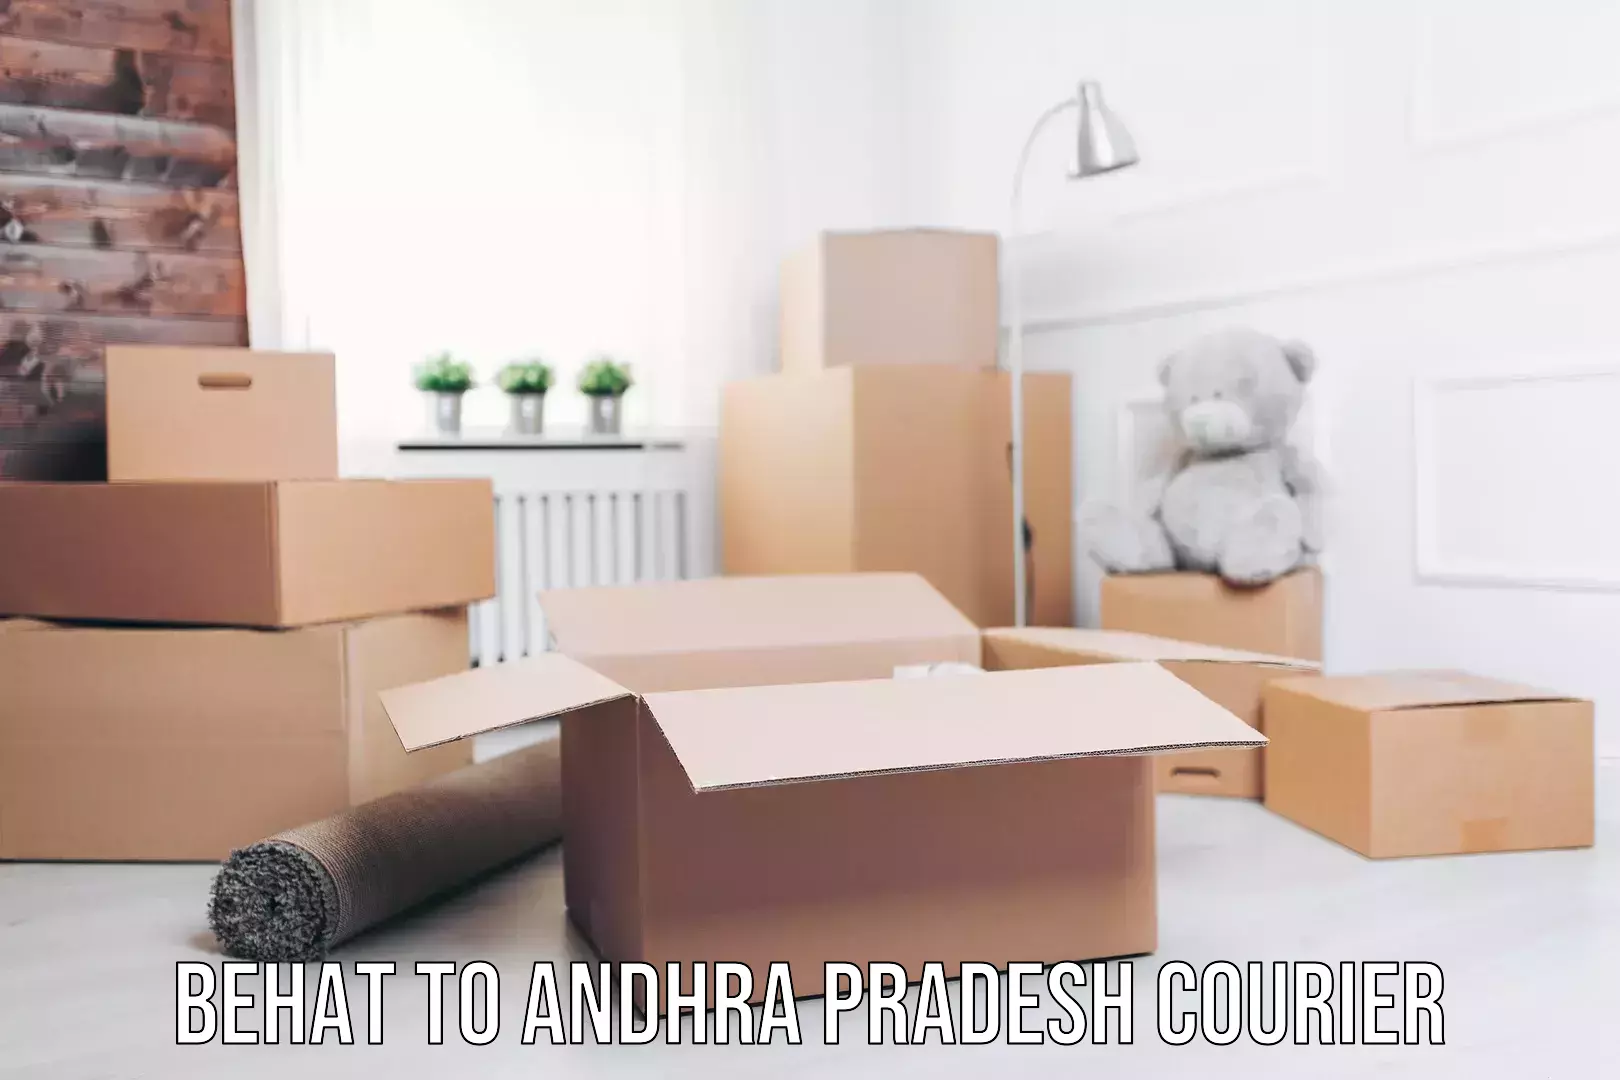 Express delivery capabilities Behat to Andhra Pradesh